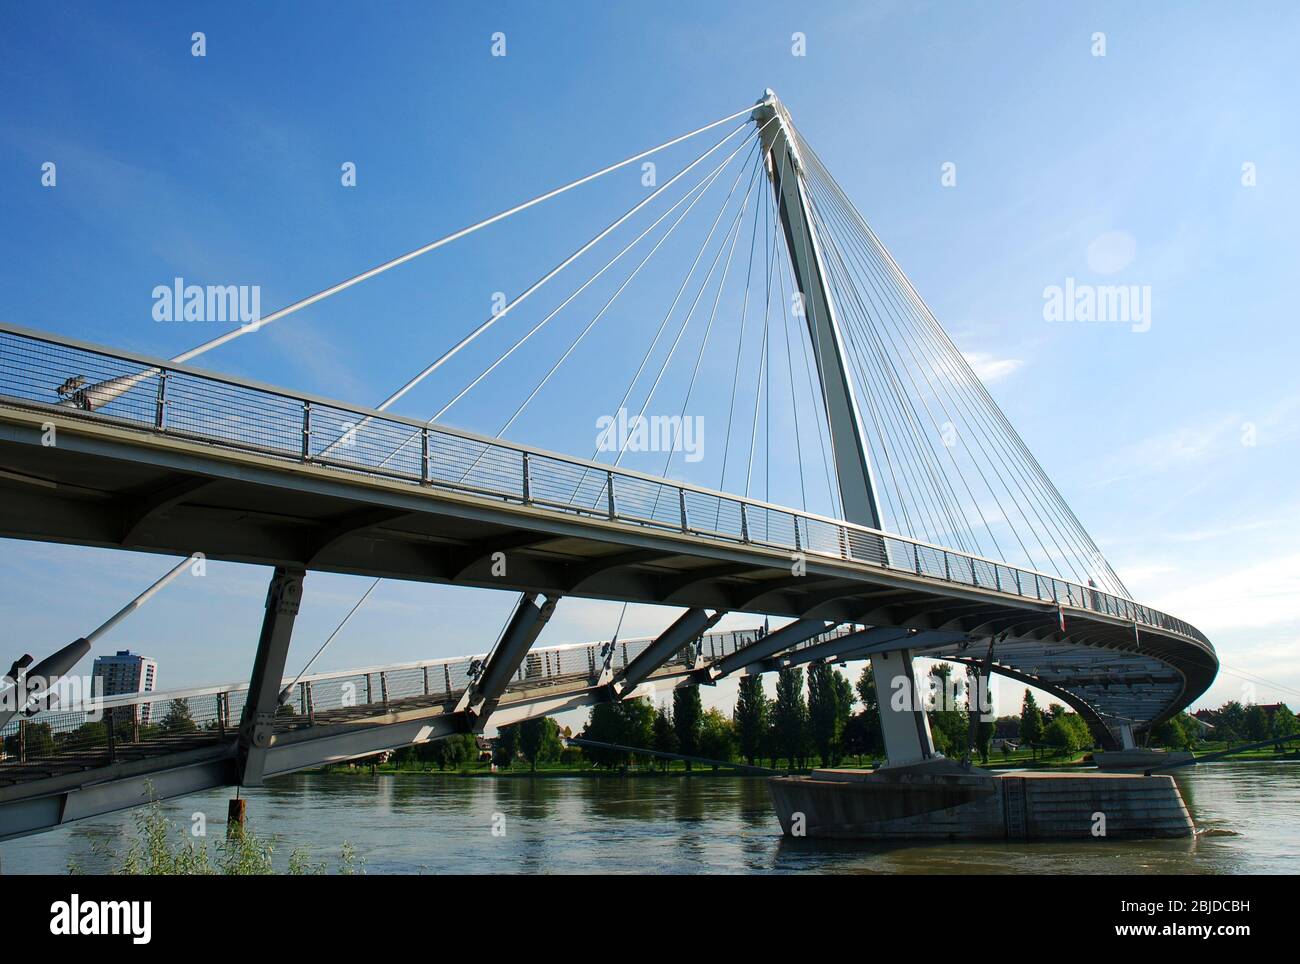 Closed Canal Lock with Part of the City, City Infrastructure, Regulation of  Water Transport, Regulation of the Water Level in the Stock Photo - Image  of river, voyage: 268380078